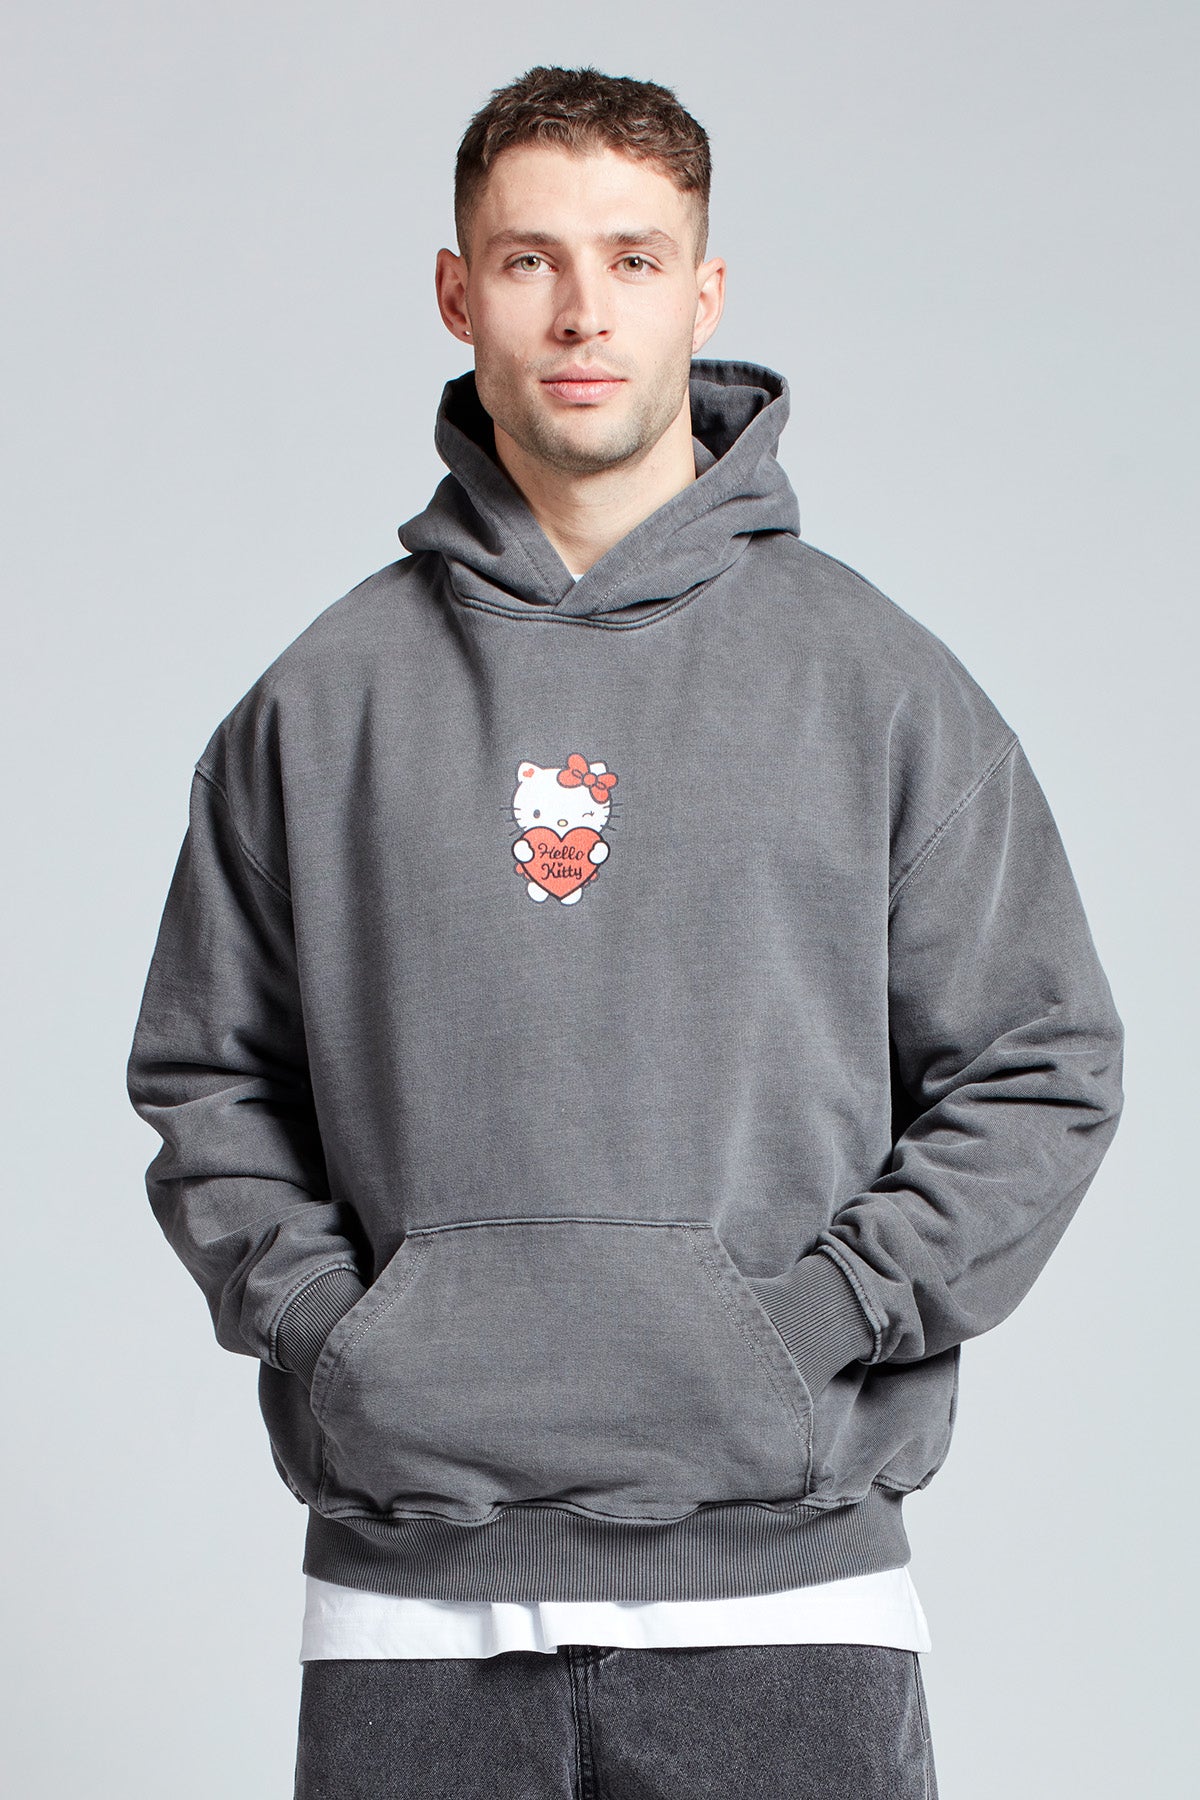 Hello Kitty Love Club Hoodie in Washed Grey